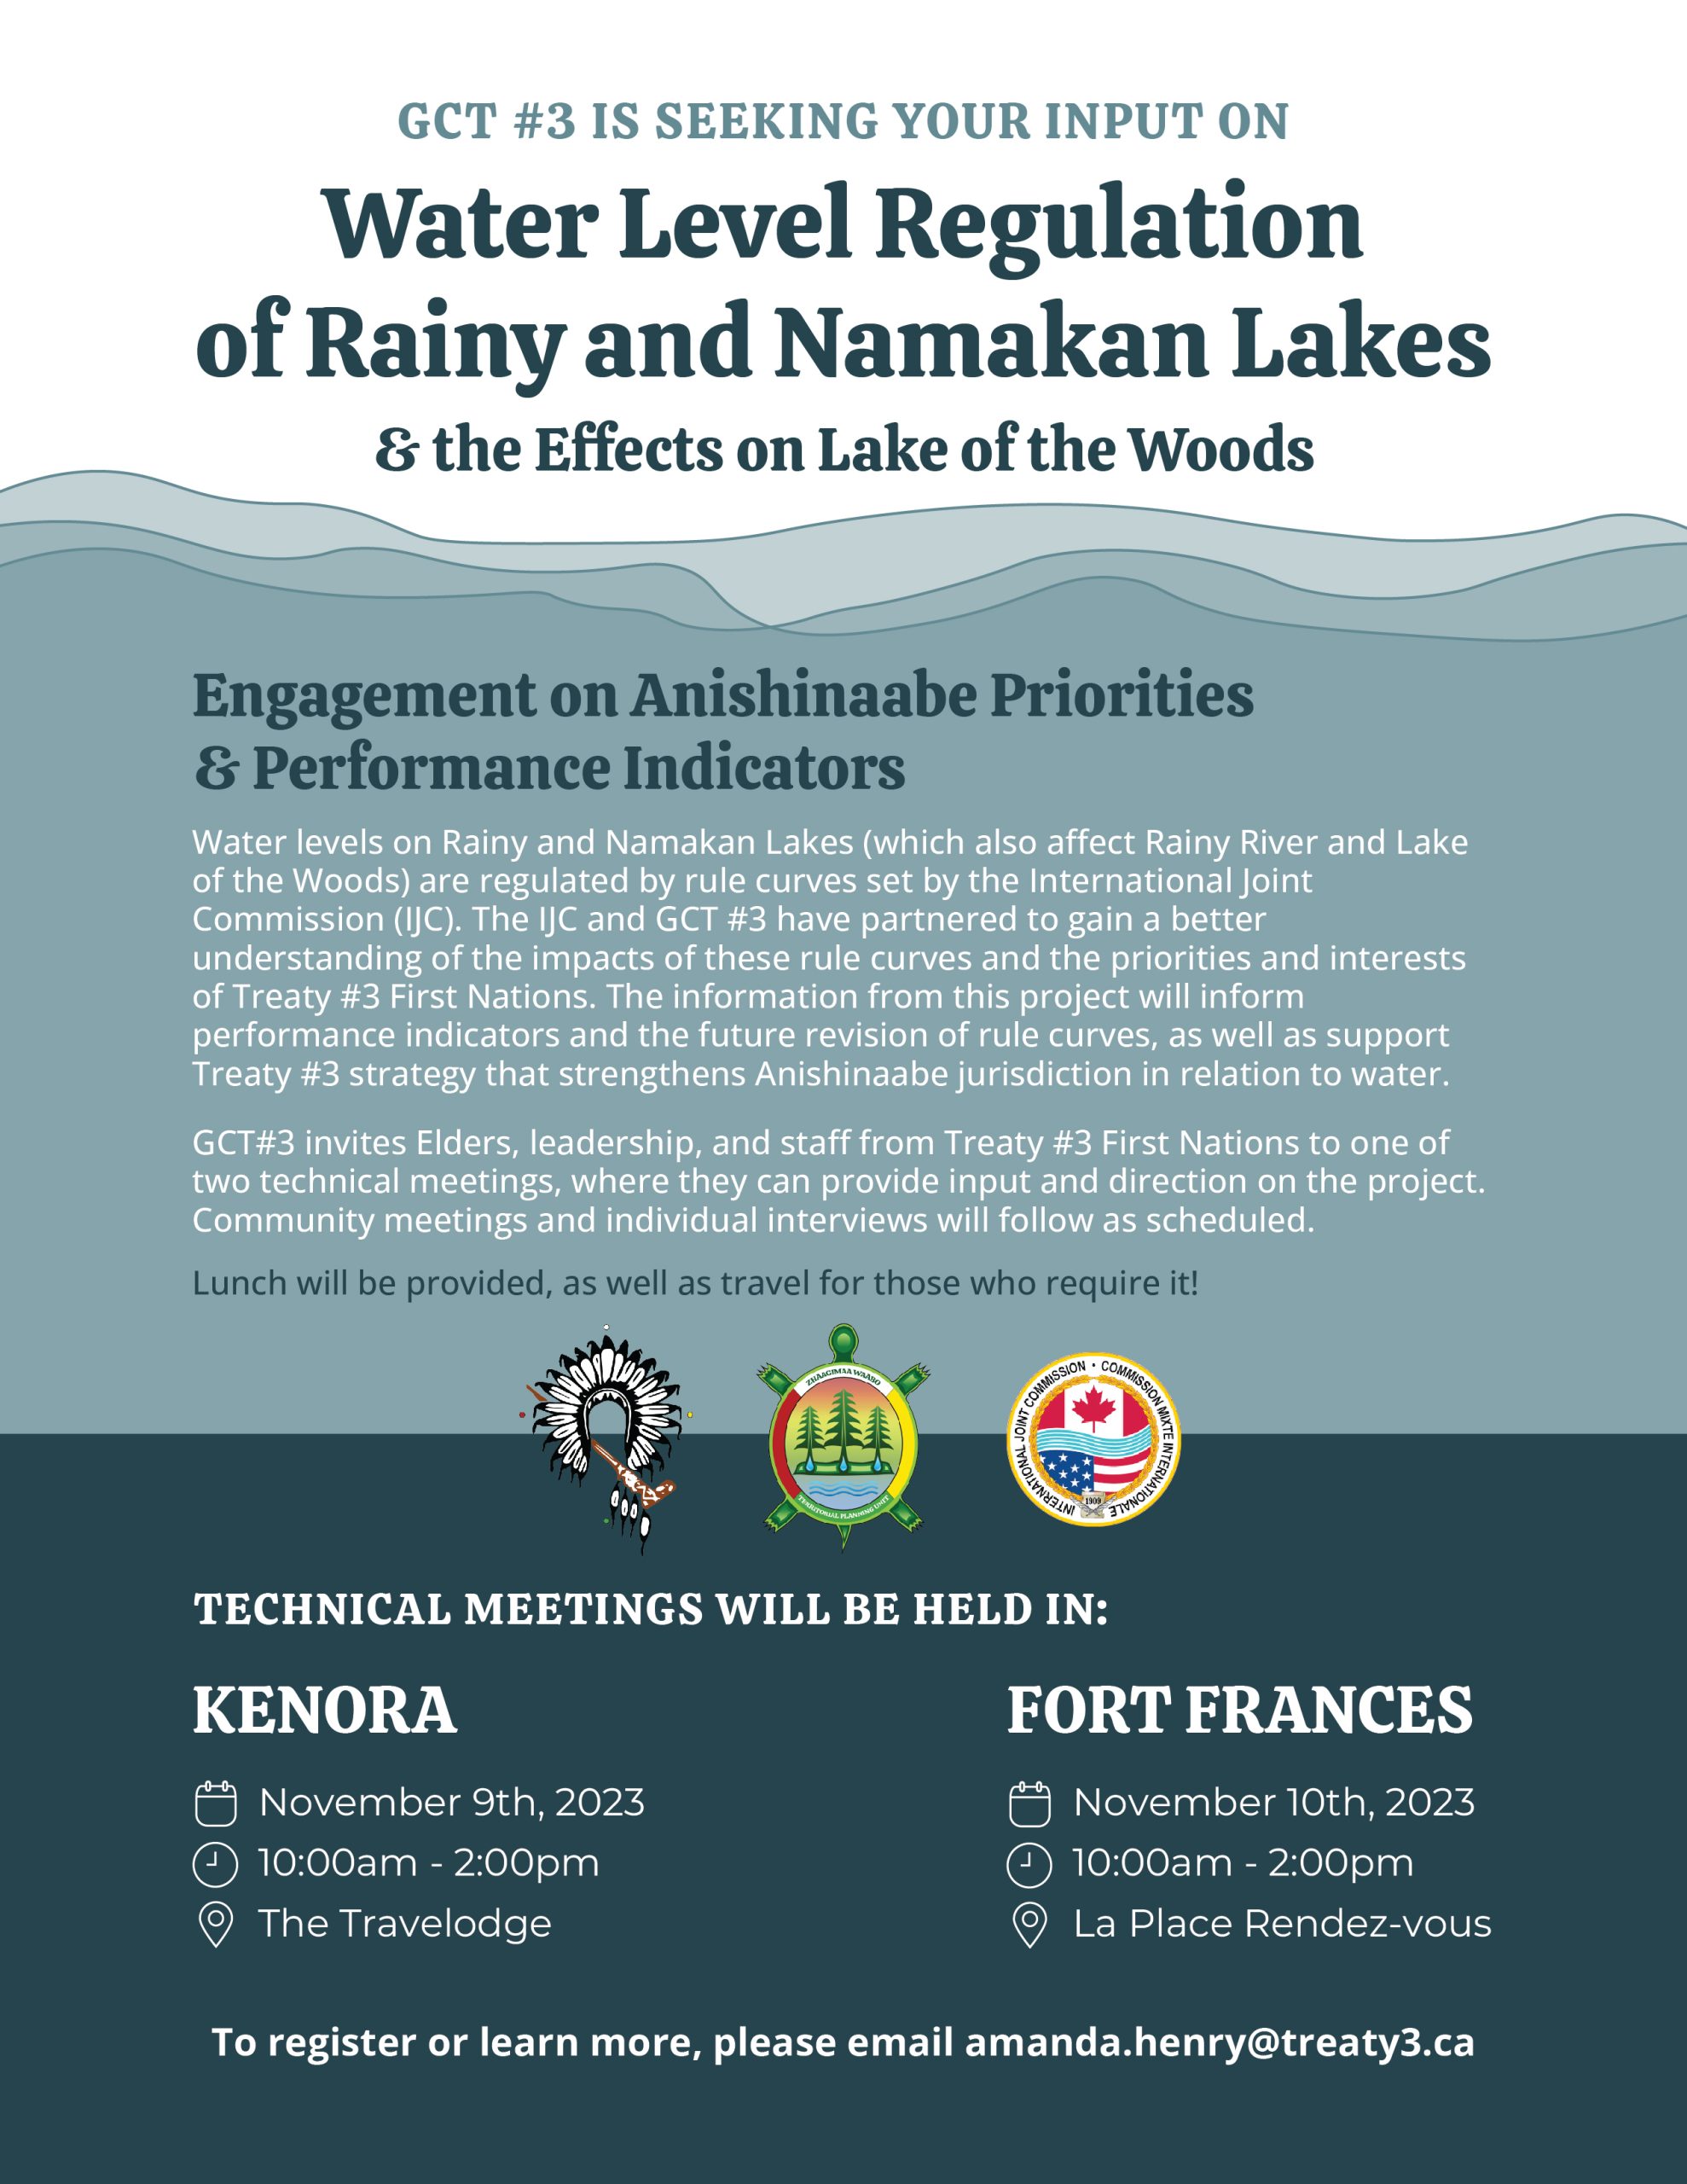 Water Level Regulation & Effects Engagement Session (Kenora)